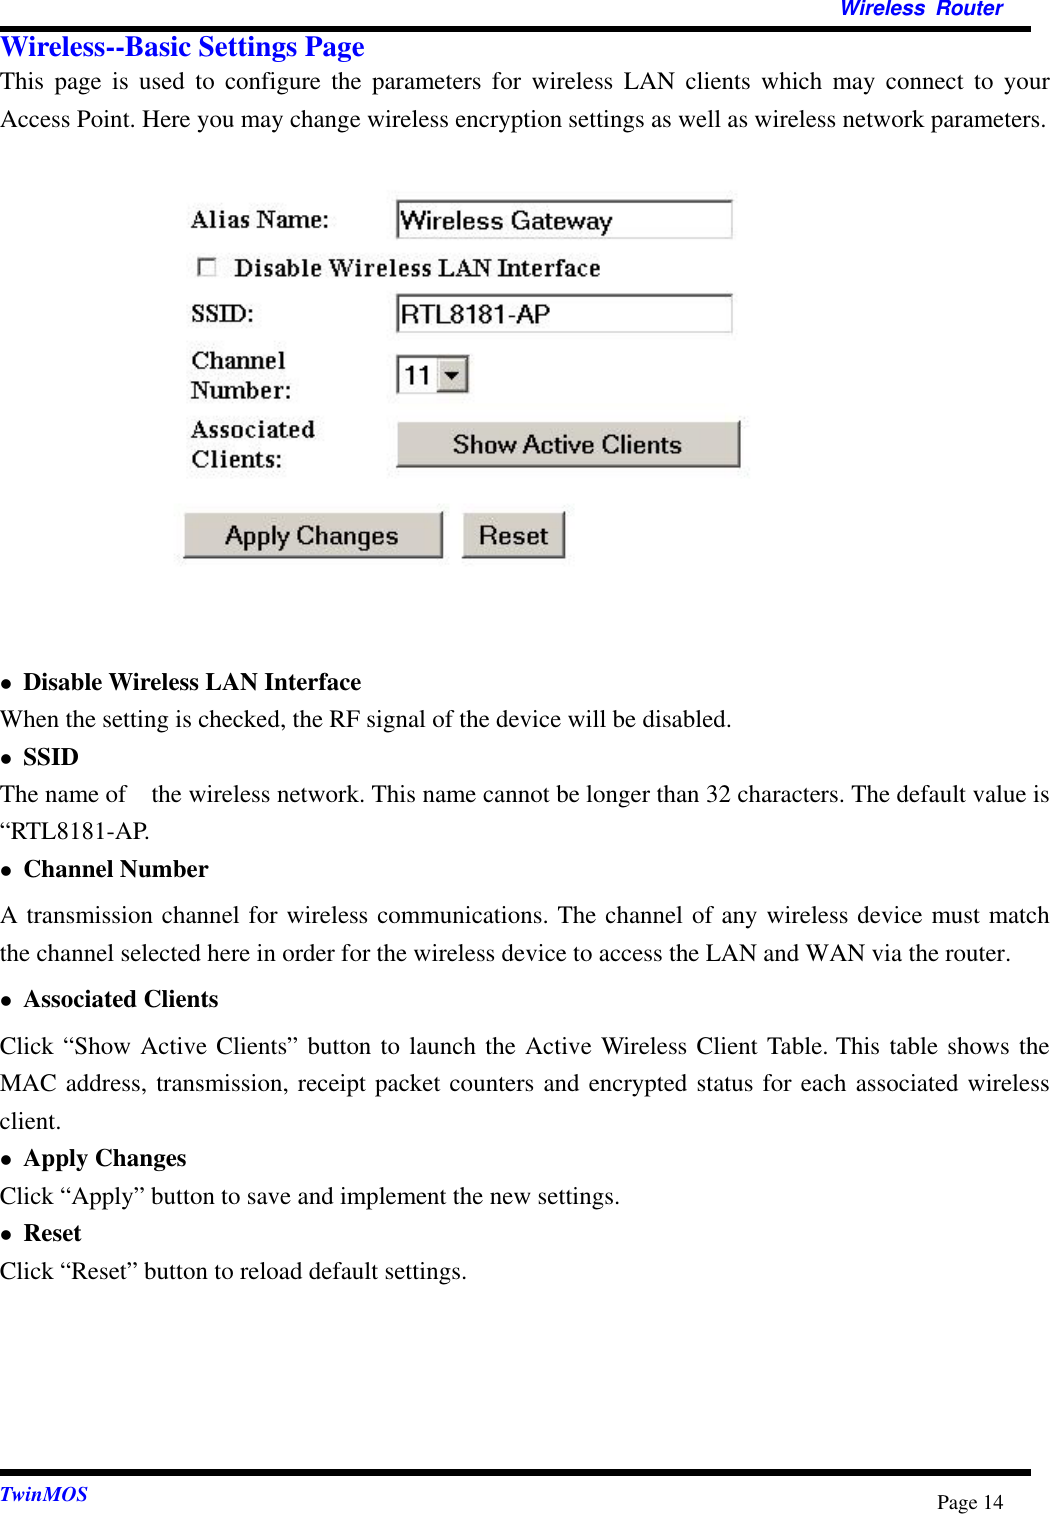   Wireless Router  TwinMOS  Page 14Wireless--Basic Settings Page This page is used to configure the parameters for wireless LAN clients which may connect to your Access Point. Here you may change wireless encryption settings as well as wireless network parameters.                Disable Wireless LAN Interface When the setting is checked, the RF signal of the device will be disabled.  SSID The name of    the wireless network. This name cannot be longer than 32 characters. The default value is “RTL8181-AP.  Channel Number A transmission channel for wireless communications. The channel of any wireless device must match the channel selected here in order for the wireless device to access the LAN and WAN via the router.    Associated Clients Click “Show Active Clients” button to launch the Active Wireless Client Table. This table shows the MAC address, transmission, receipt packet counters and encrypted status for each associated wireless client.  Apply Changes Click “Apply” button to save and implement the new settings.  Reset Click “Reset” button to reload default settings.     